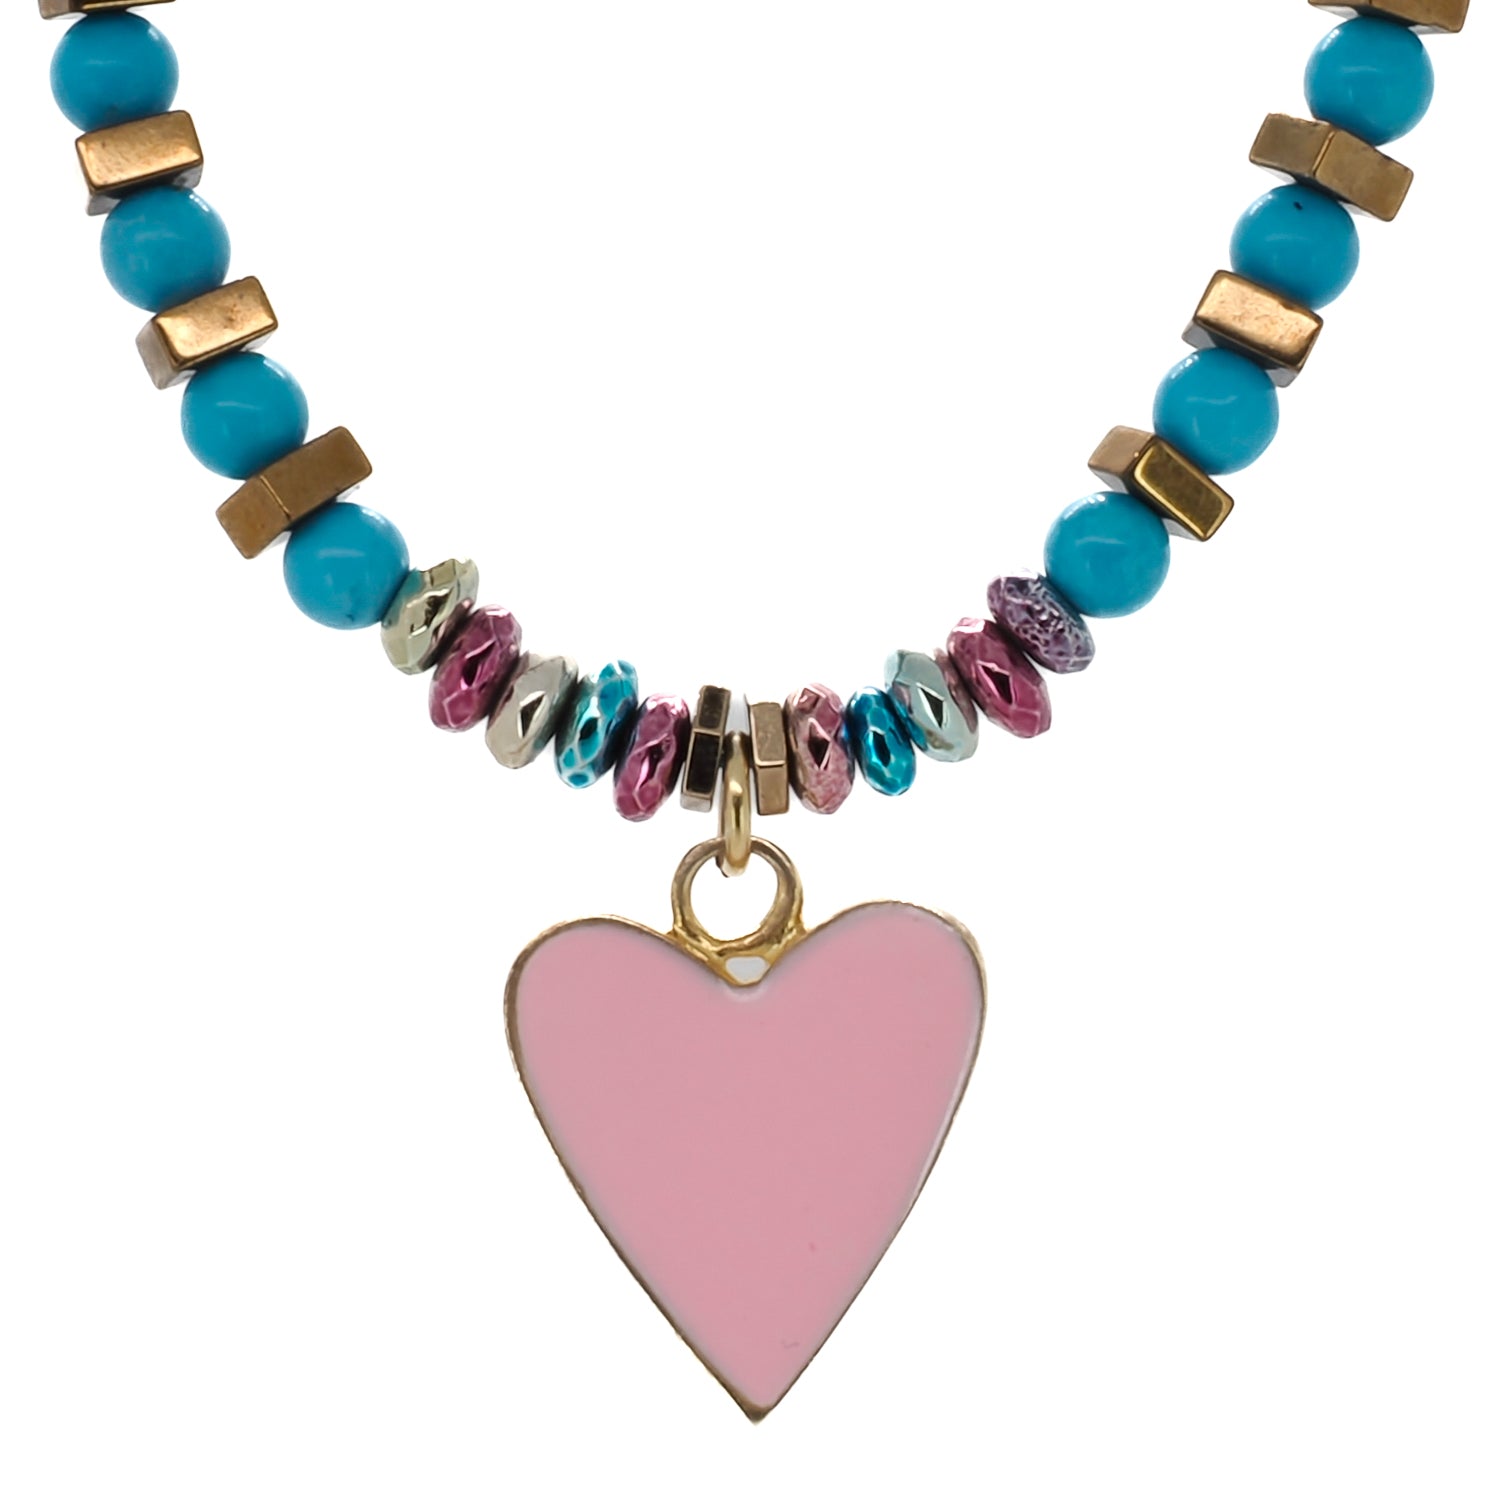 Vibrant Turquoise and Pink Choker Necklace - Add a pop of color to your style with this unique piece.